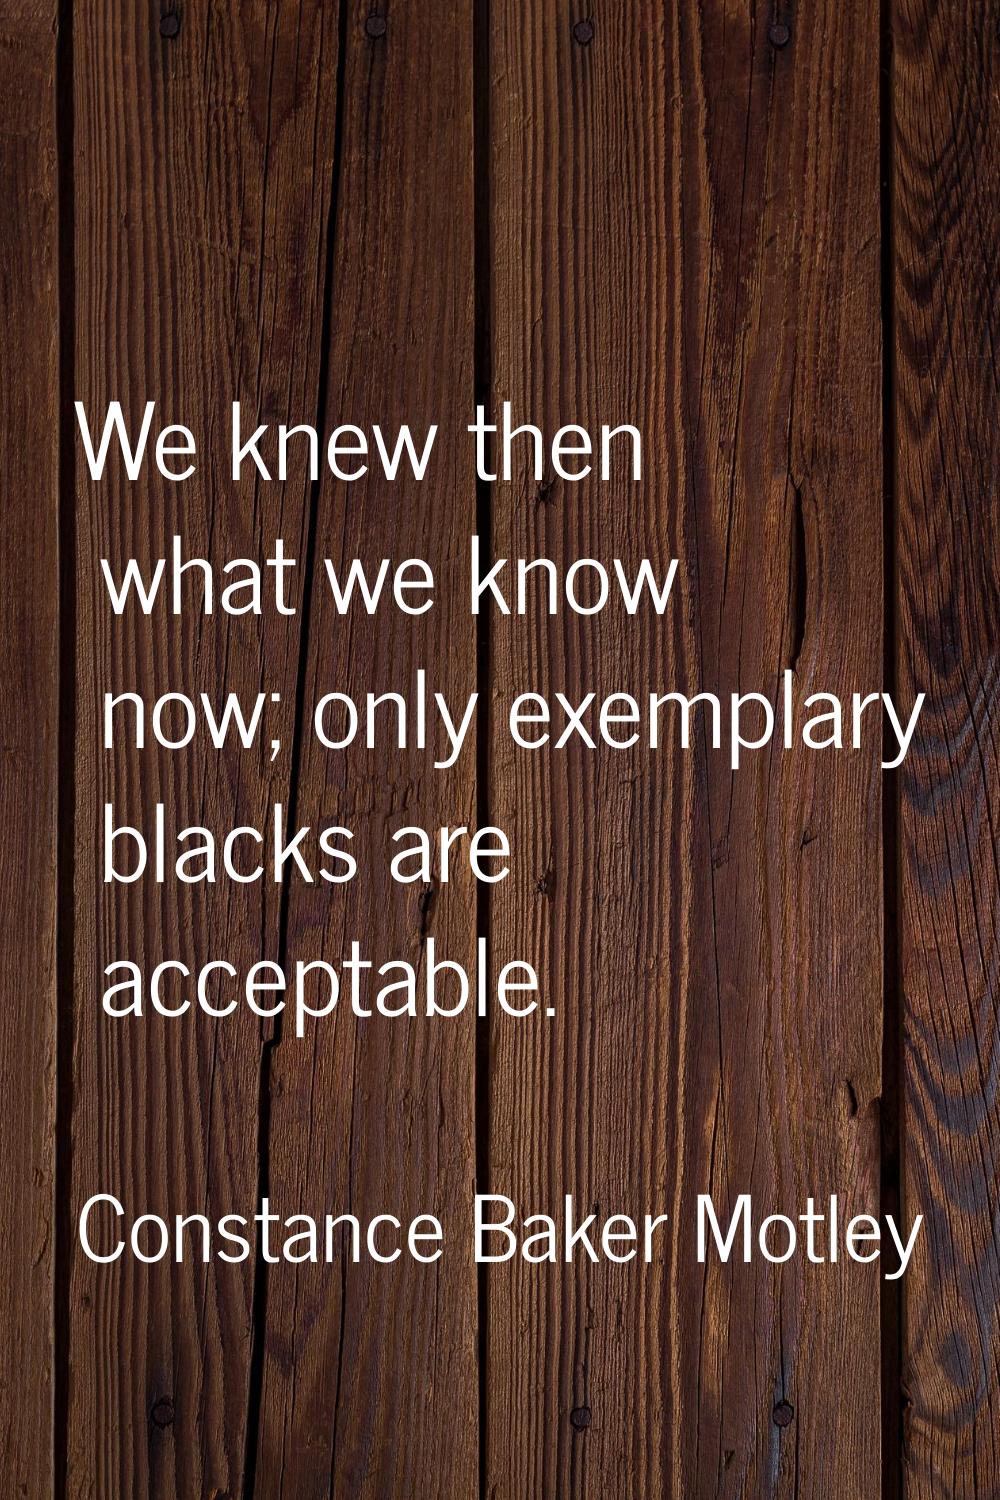 We knew then what we know now; only exemplary blacks are acceptable.